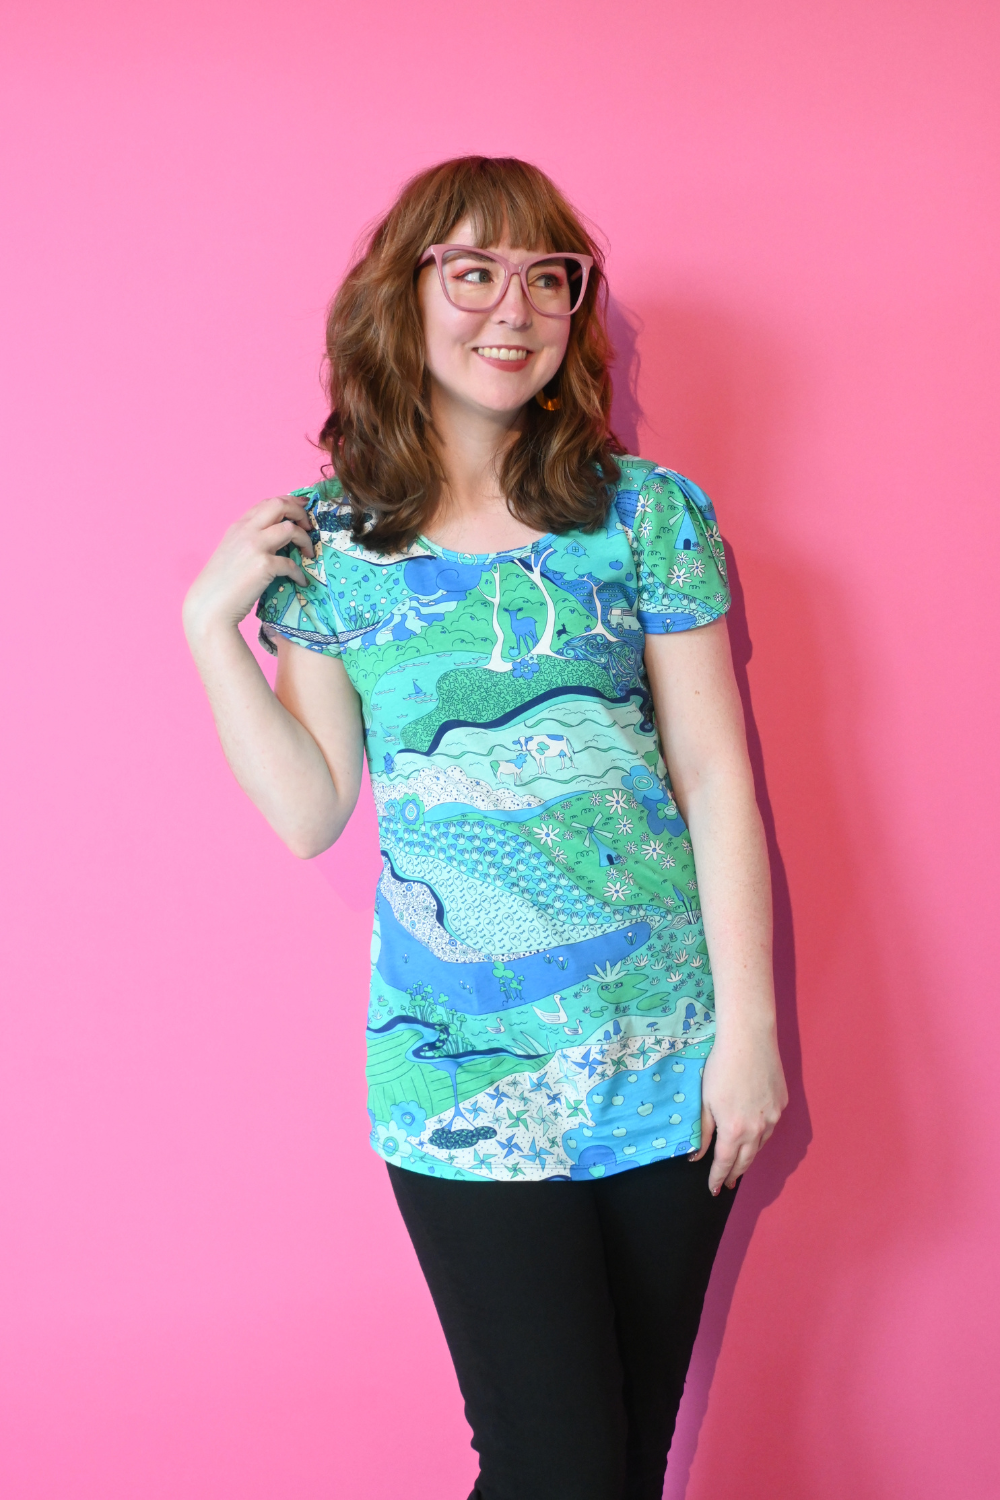 Model with glasses wearing shirt with landscape graphic in green and blue